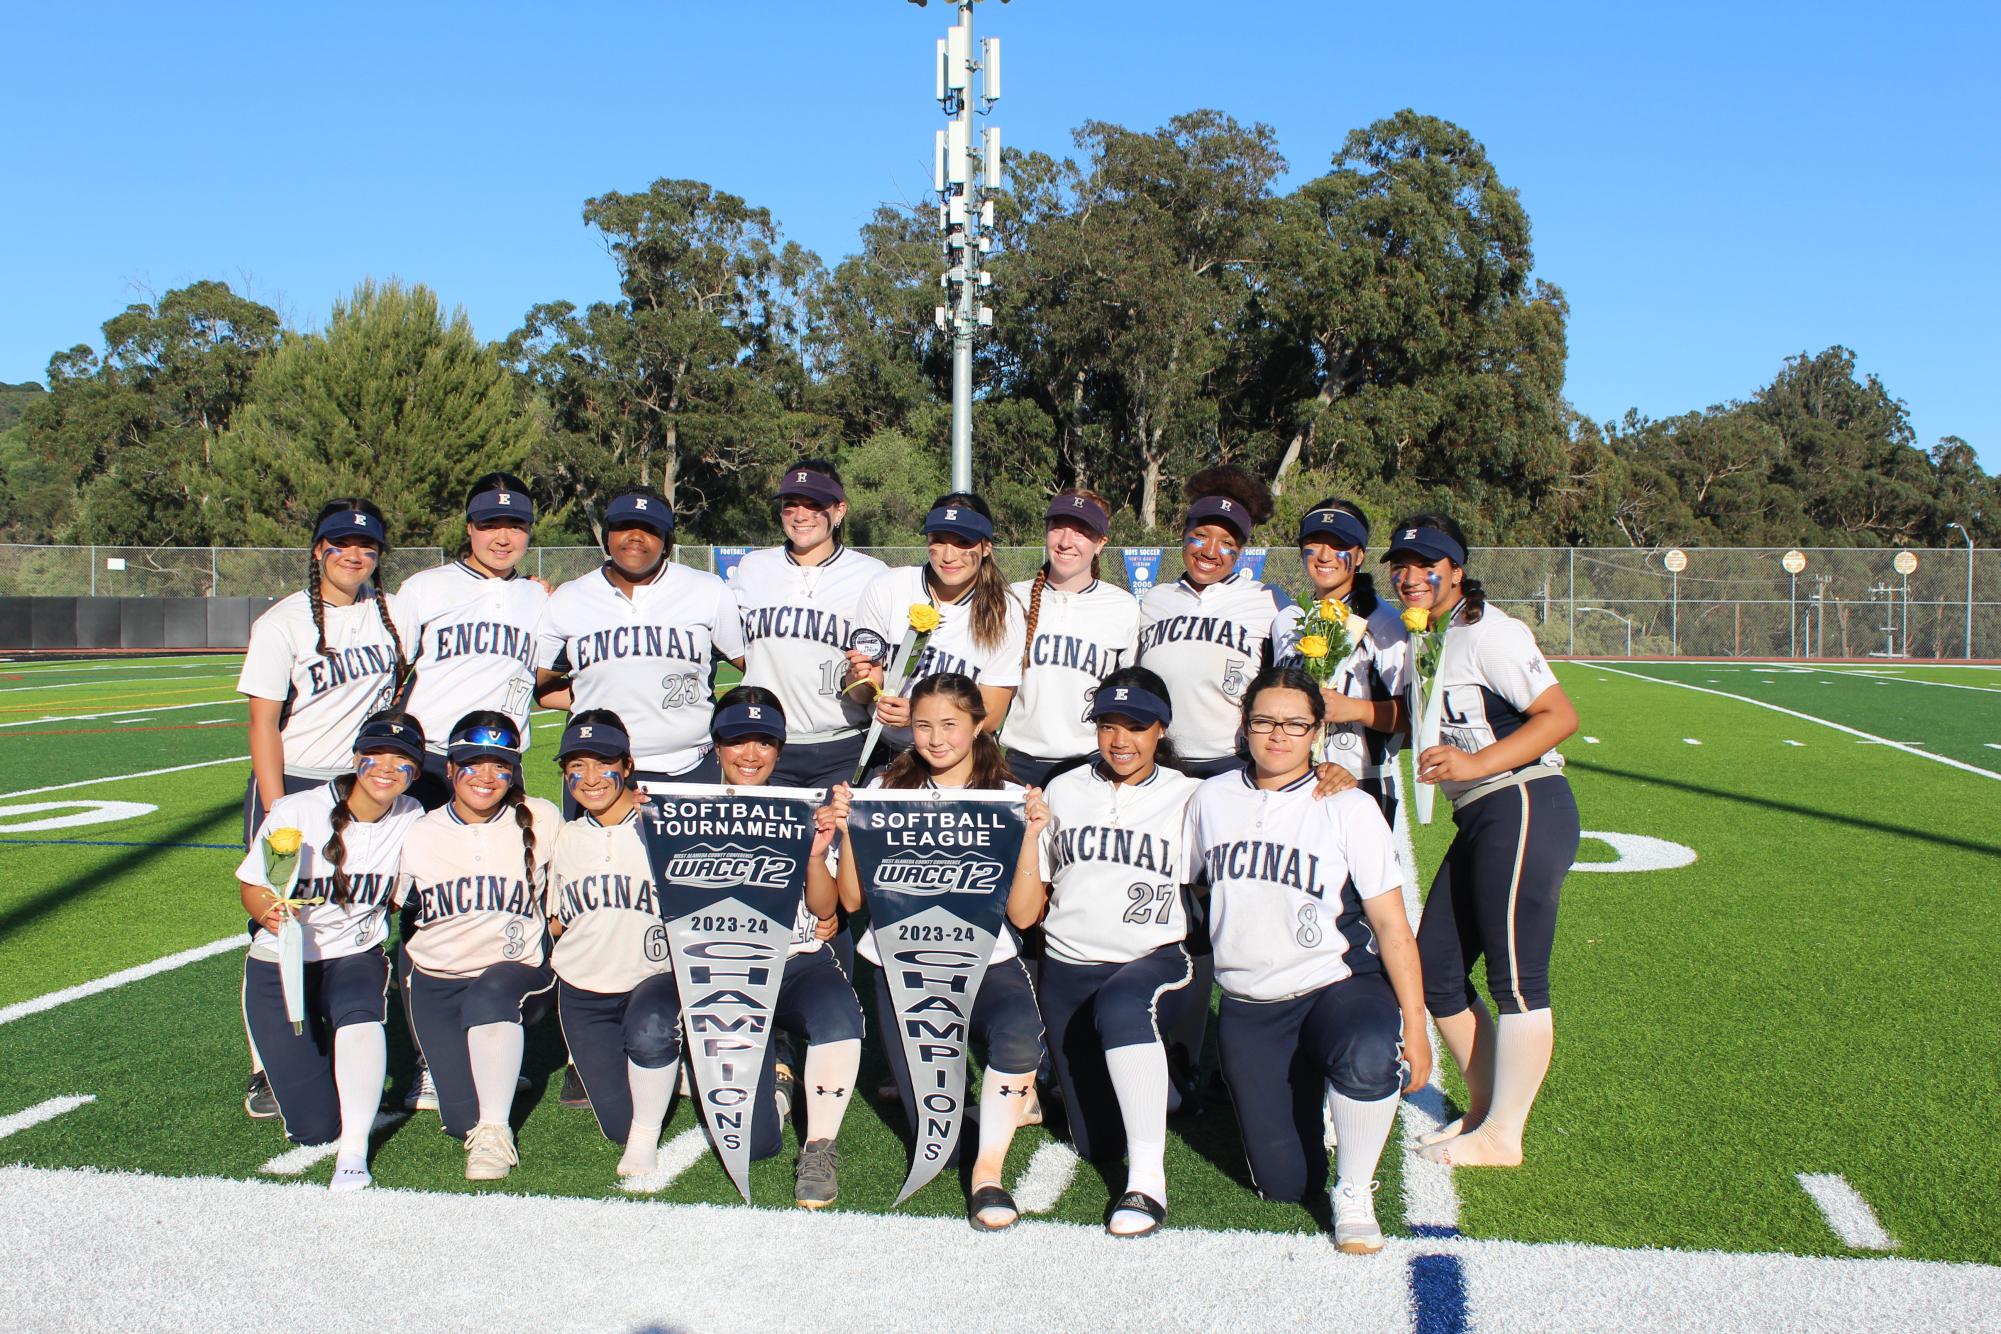 Encinal Softball Team Wins Elusive League Title After 20 Years